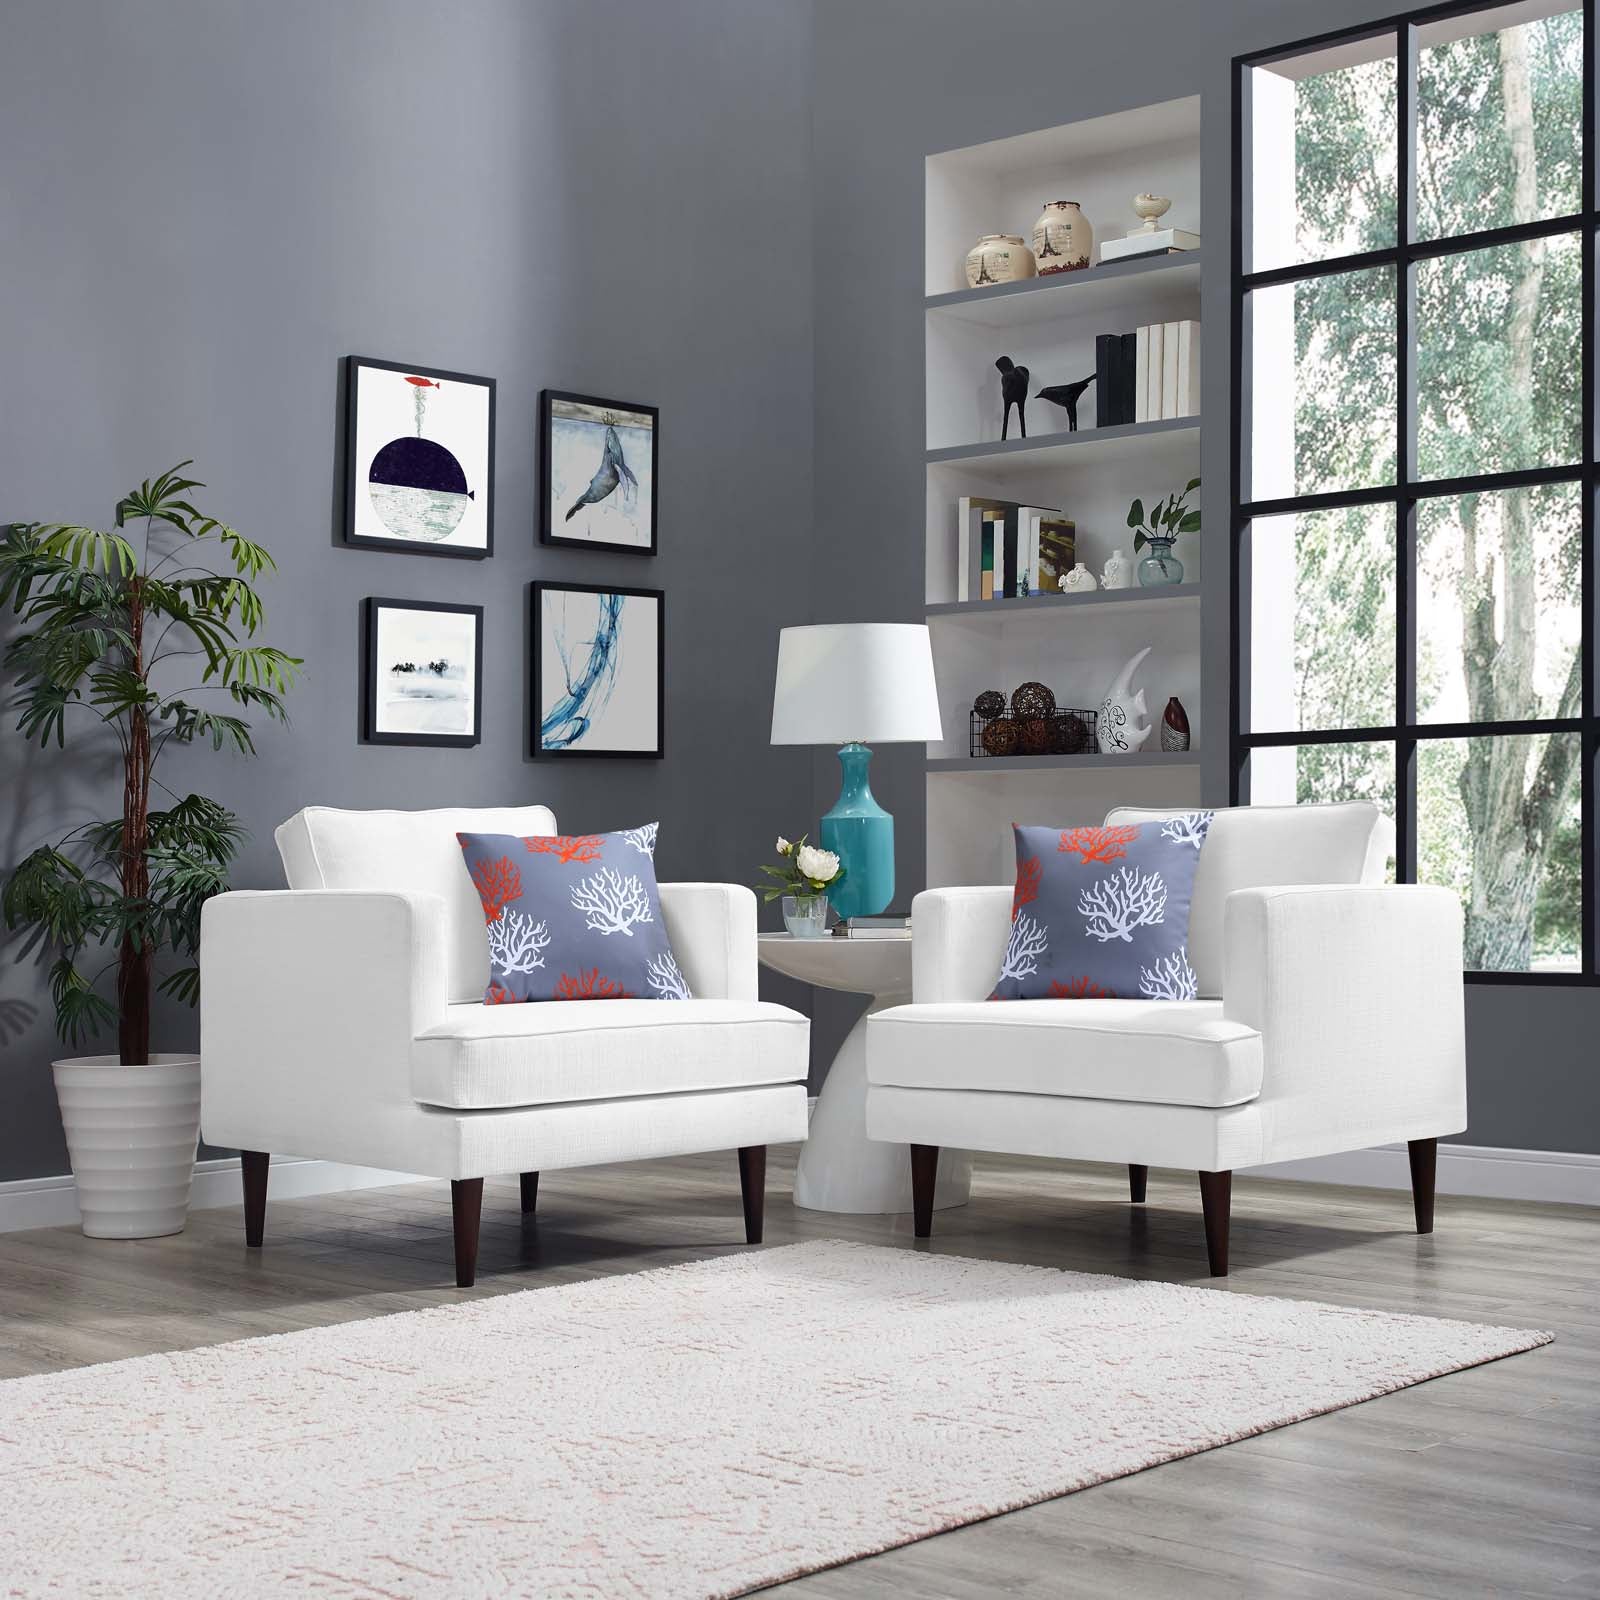 Modway Living Room Sets - Agile Upholstered Fabric Armchair Set of 2 White